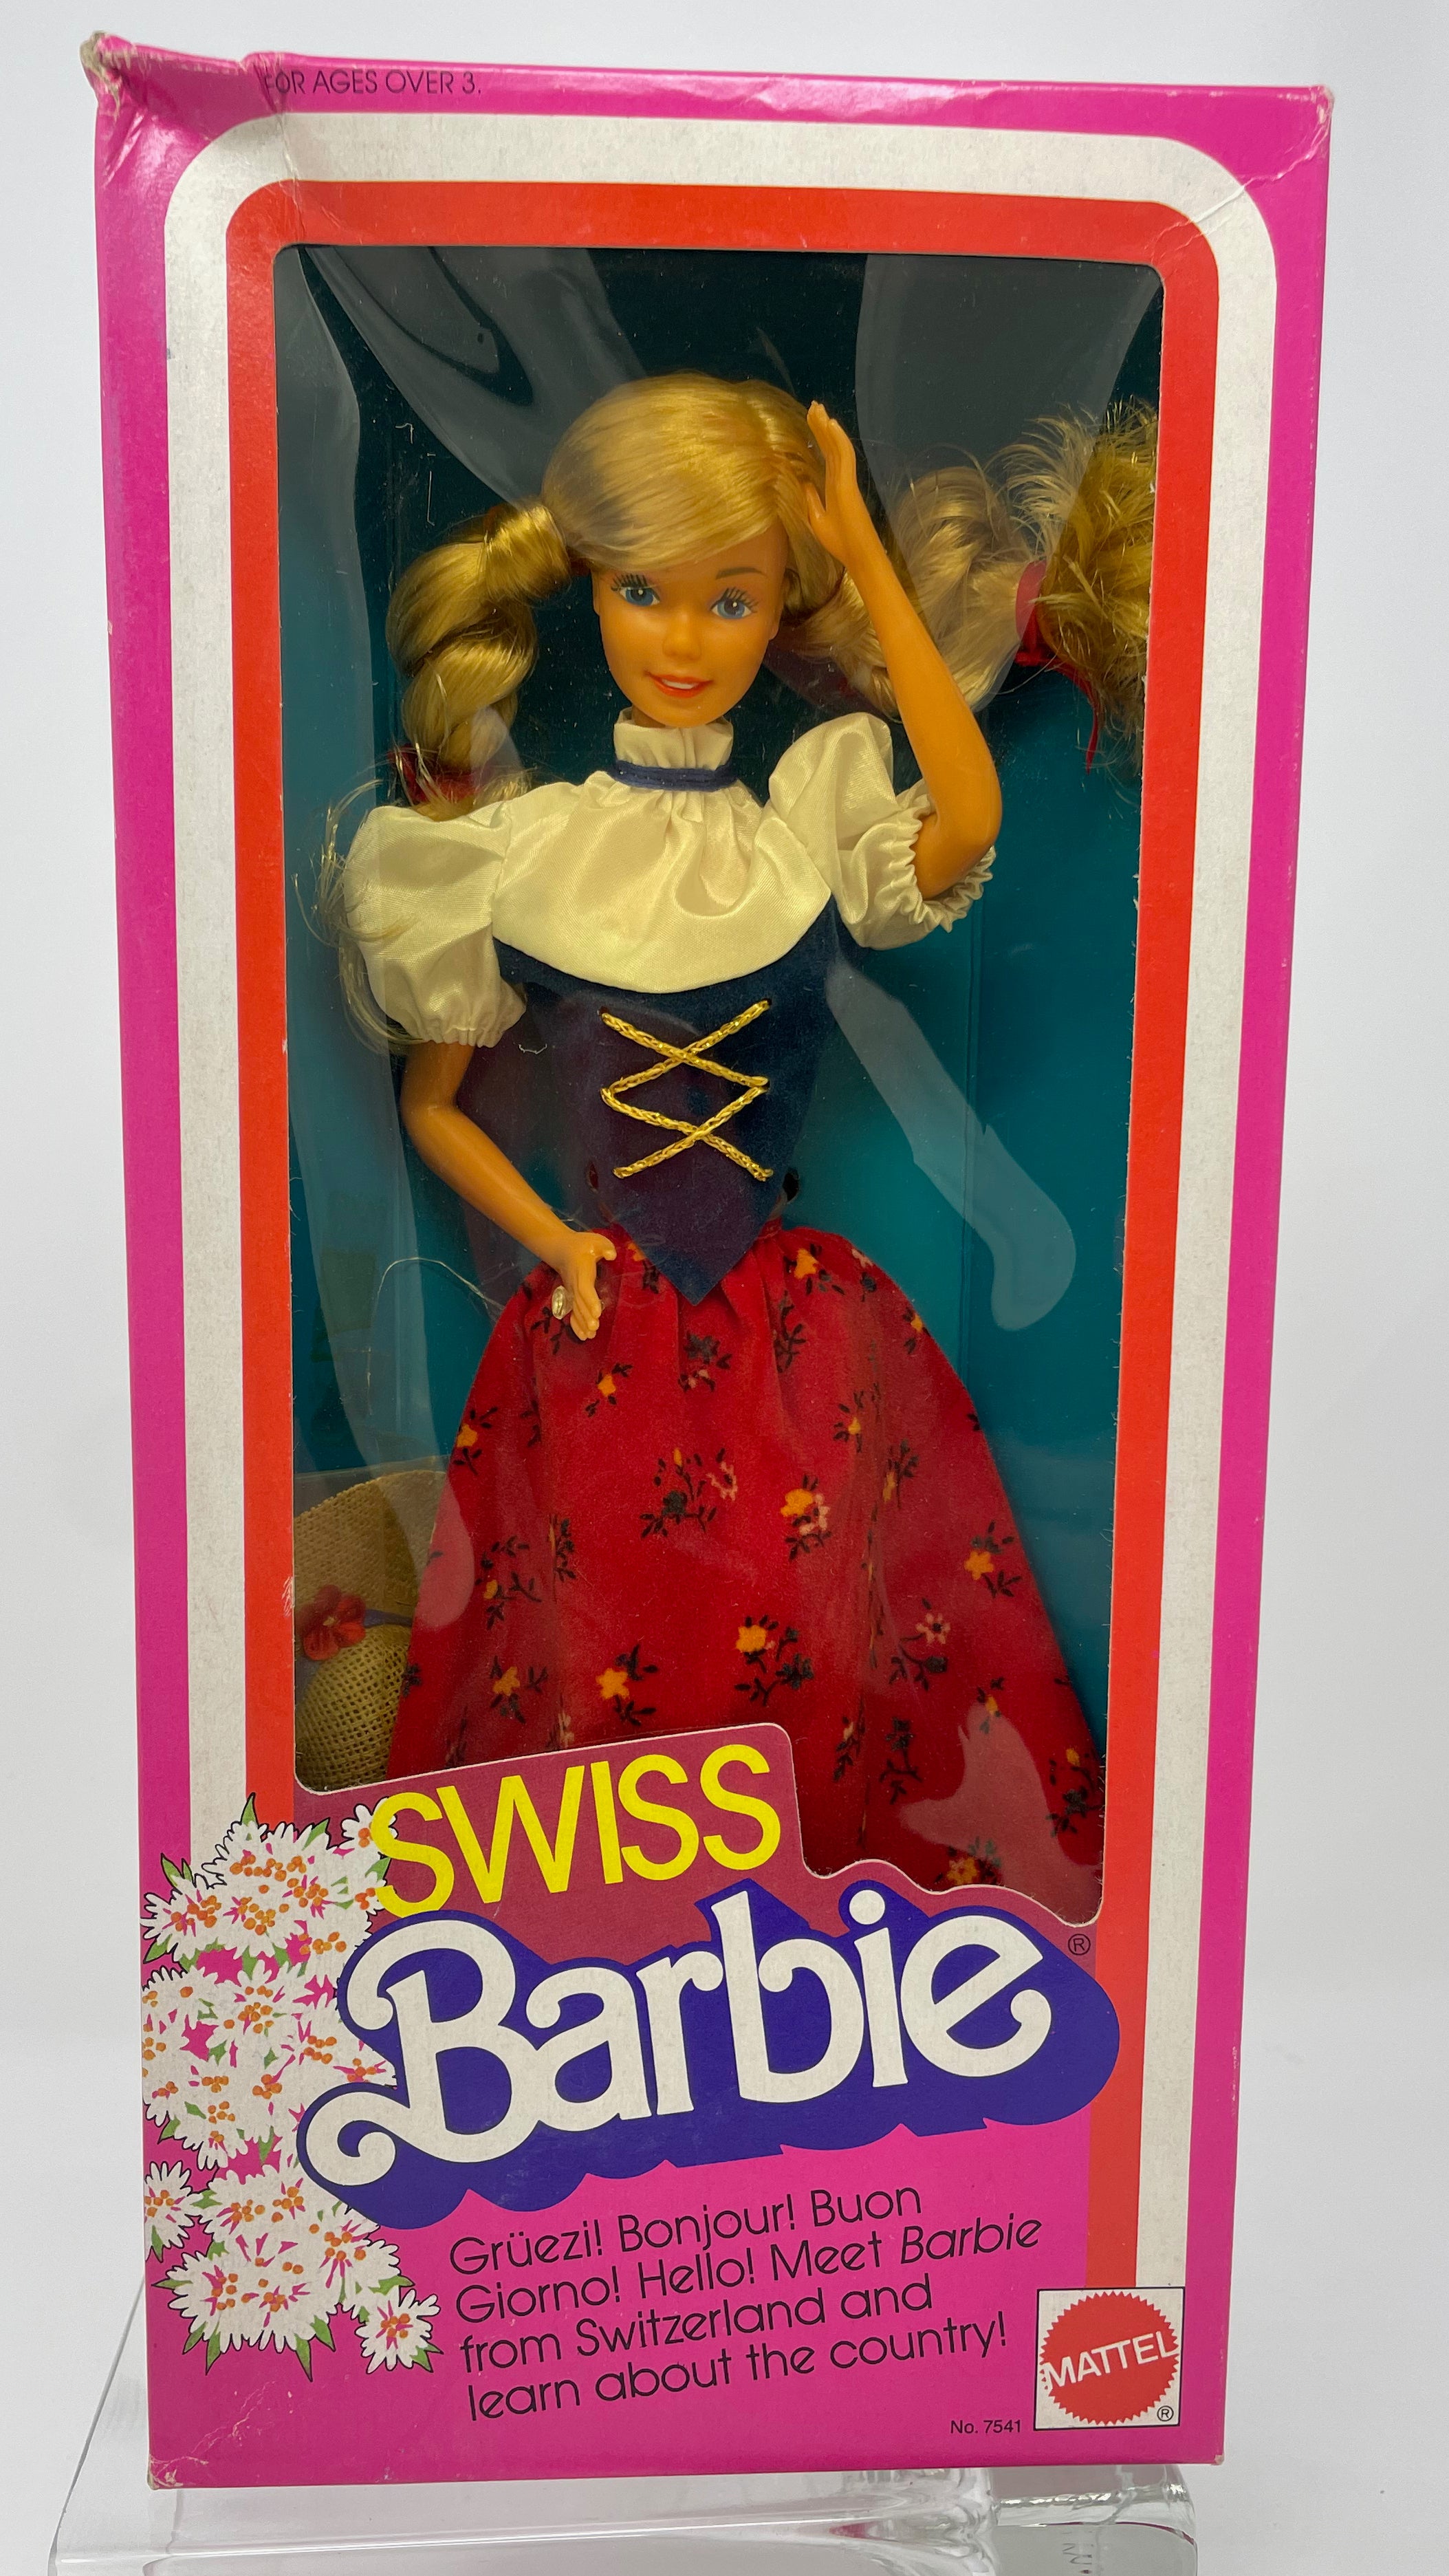 SWISS BARBIE - BARBIE DOLLS OF THE WORLD COLLECTION #7541 - MATTEL